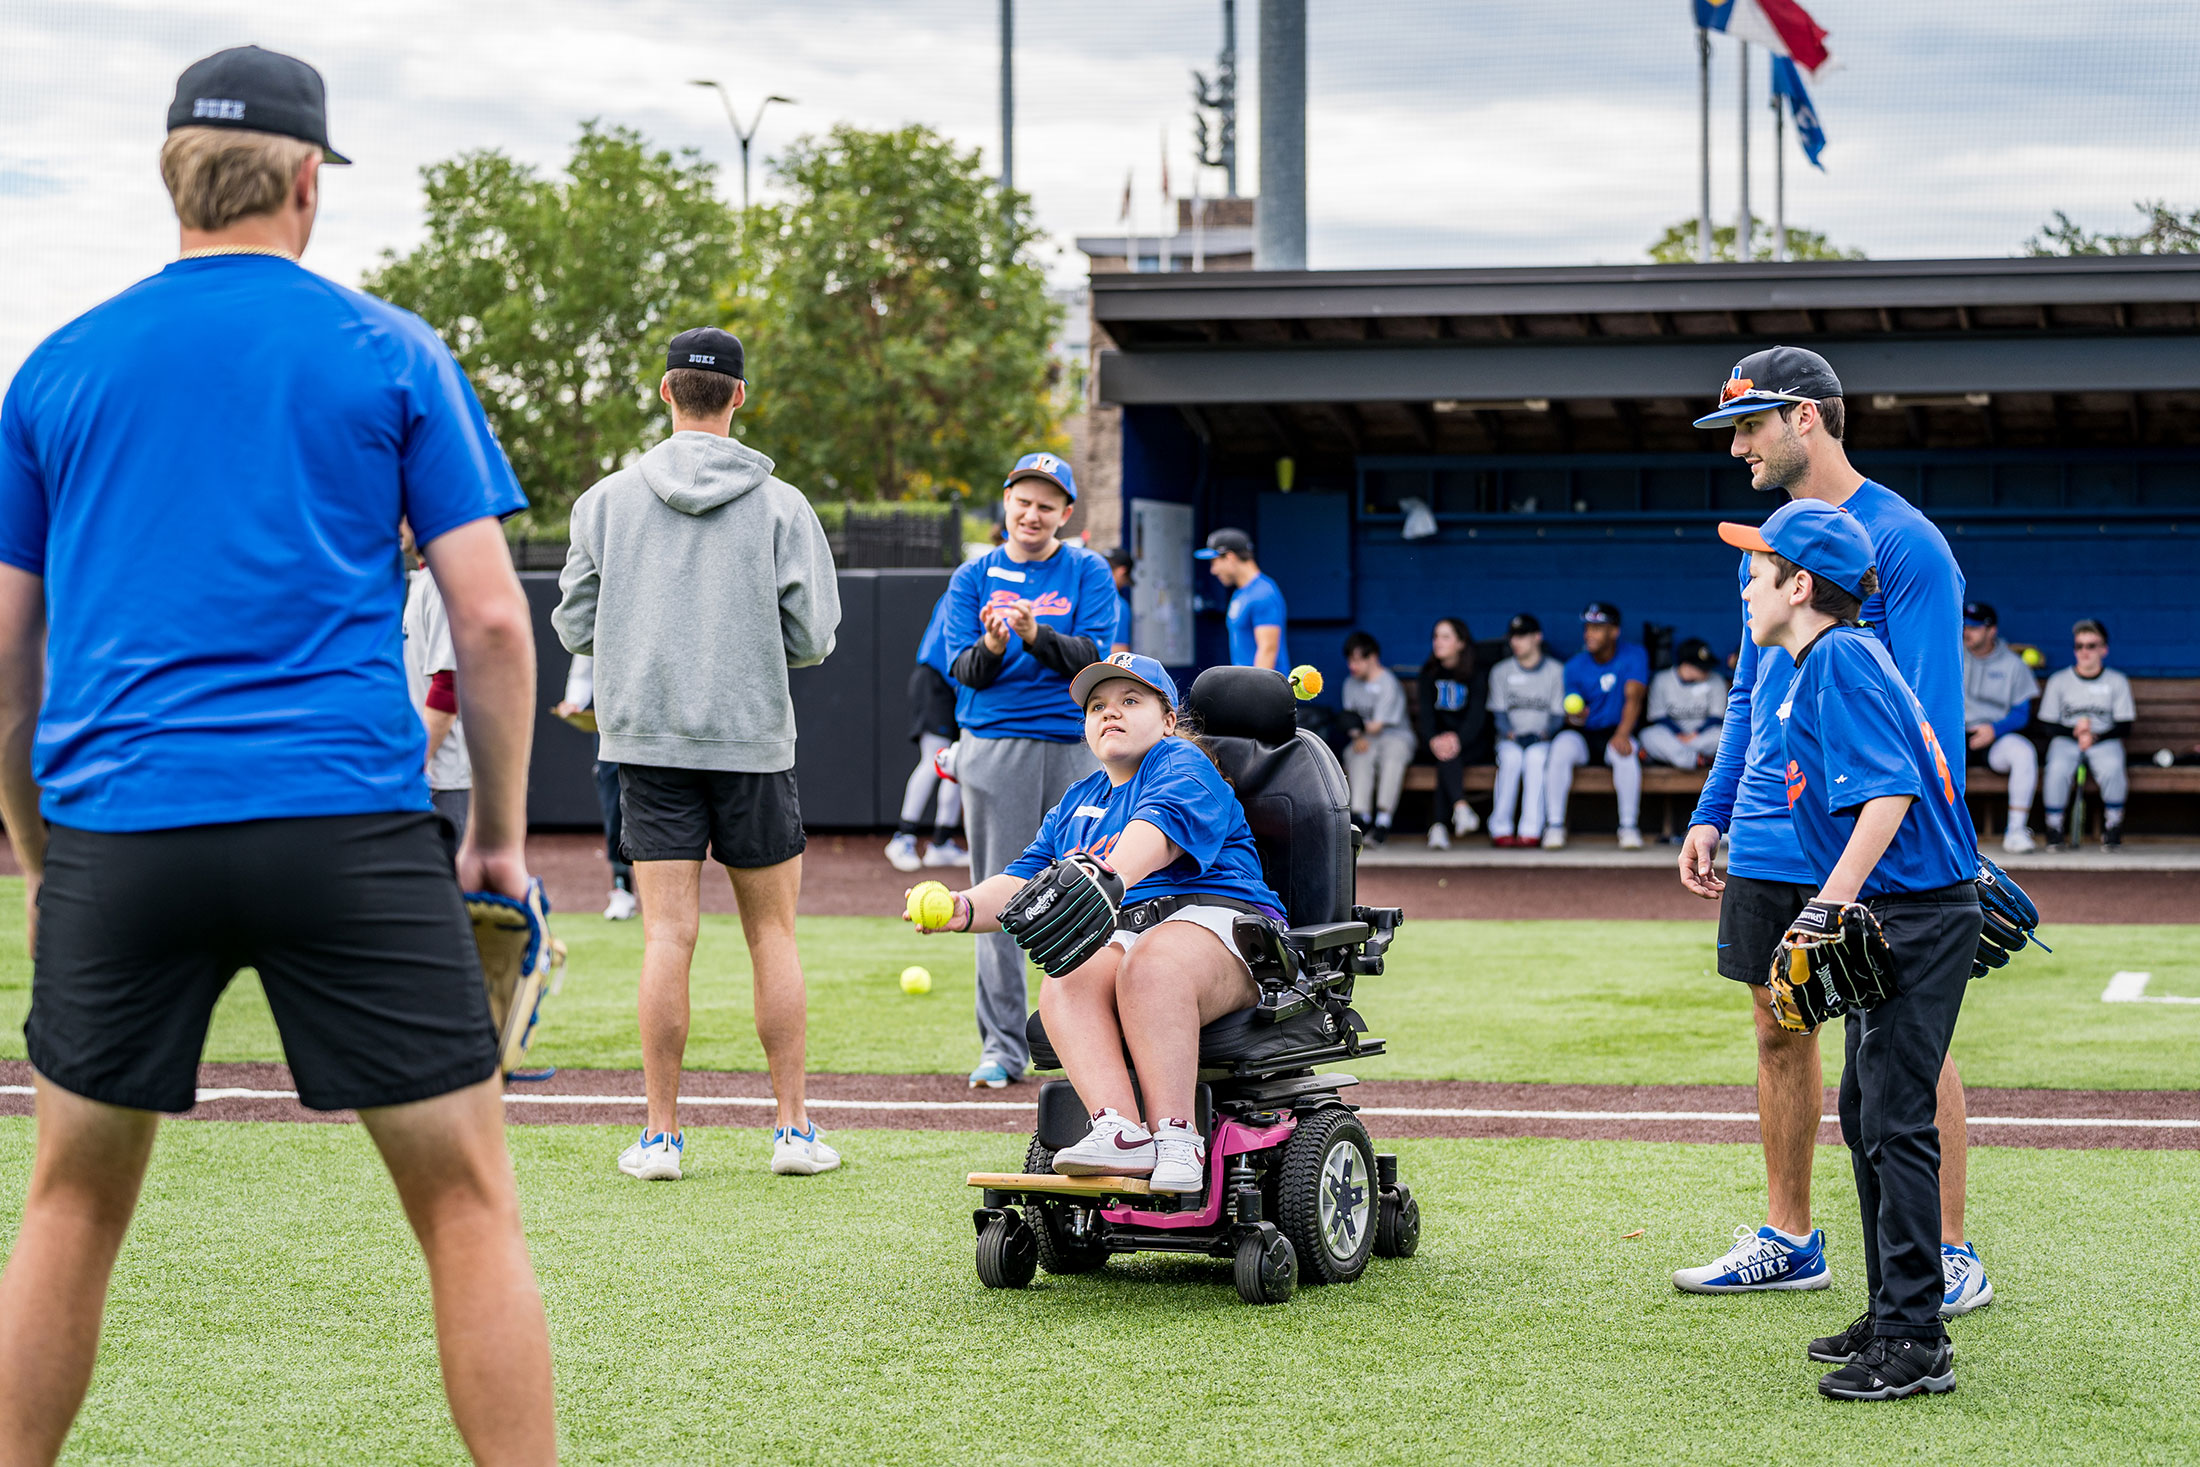 Duke baseball players toss around the ball with Miracle League players.